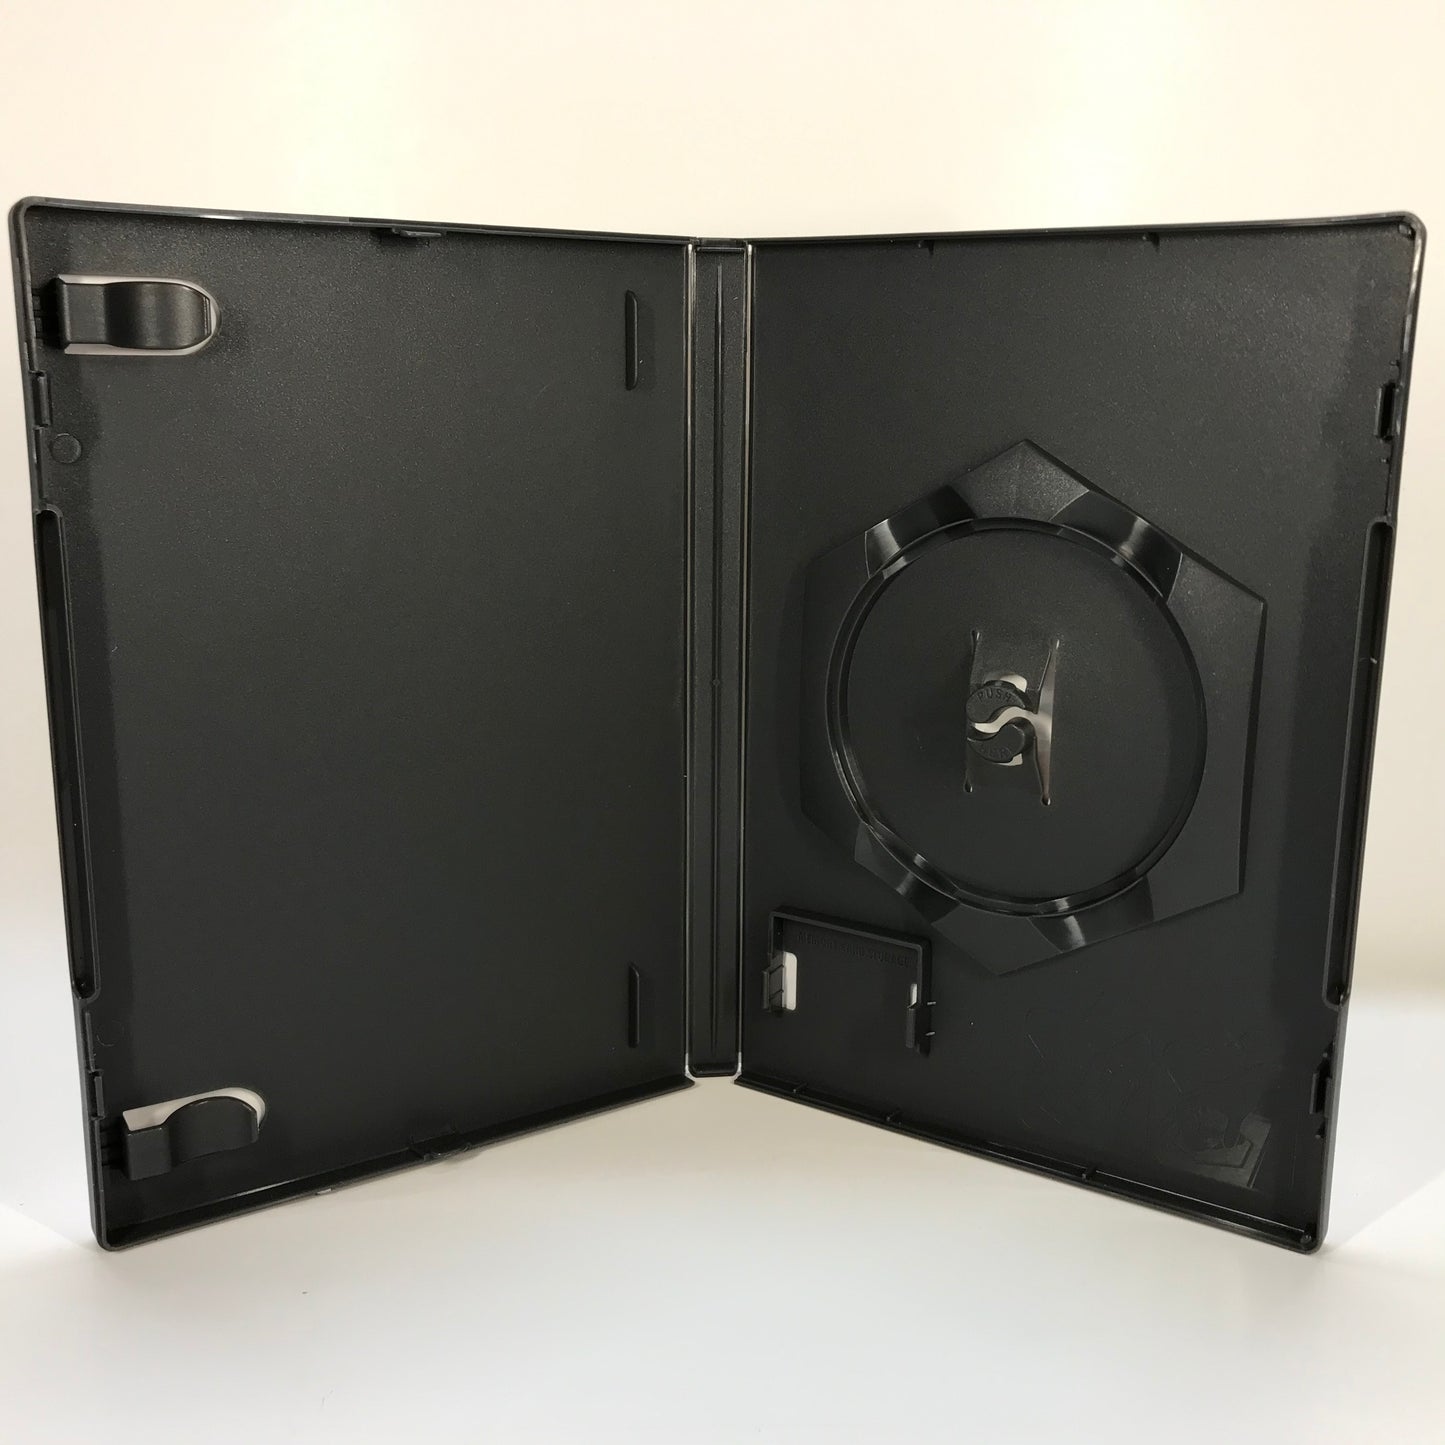 GameCube Replacement Case - NO GAME - Robots